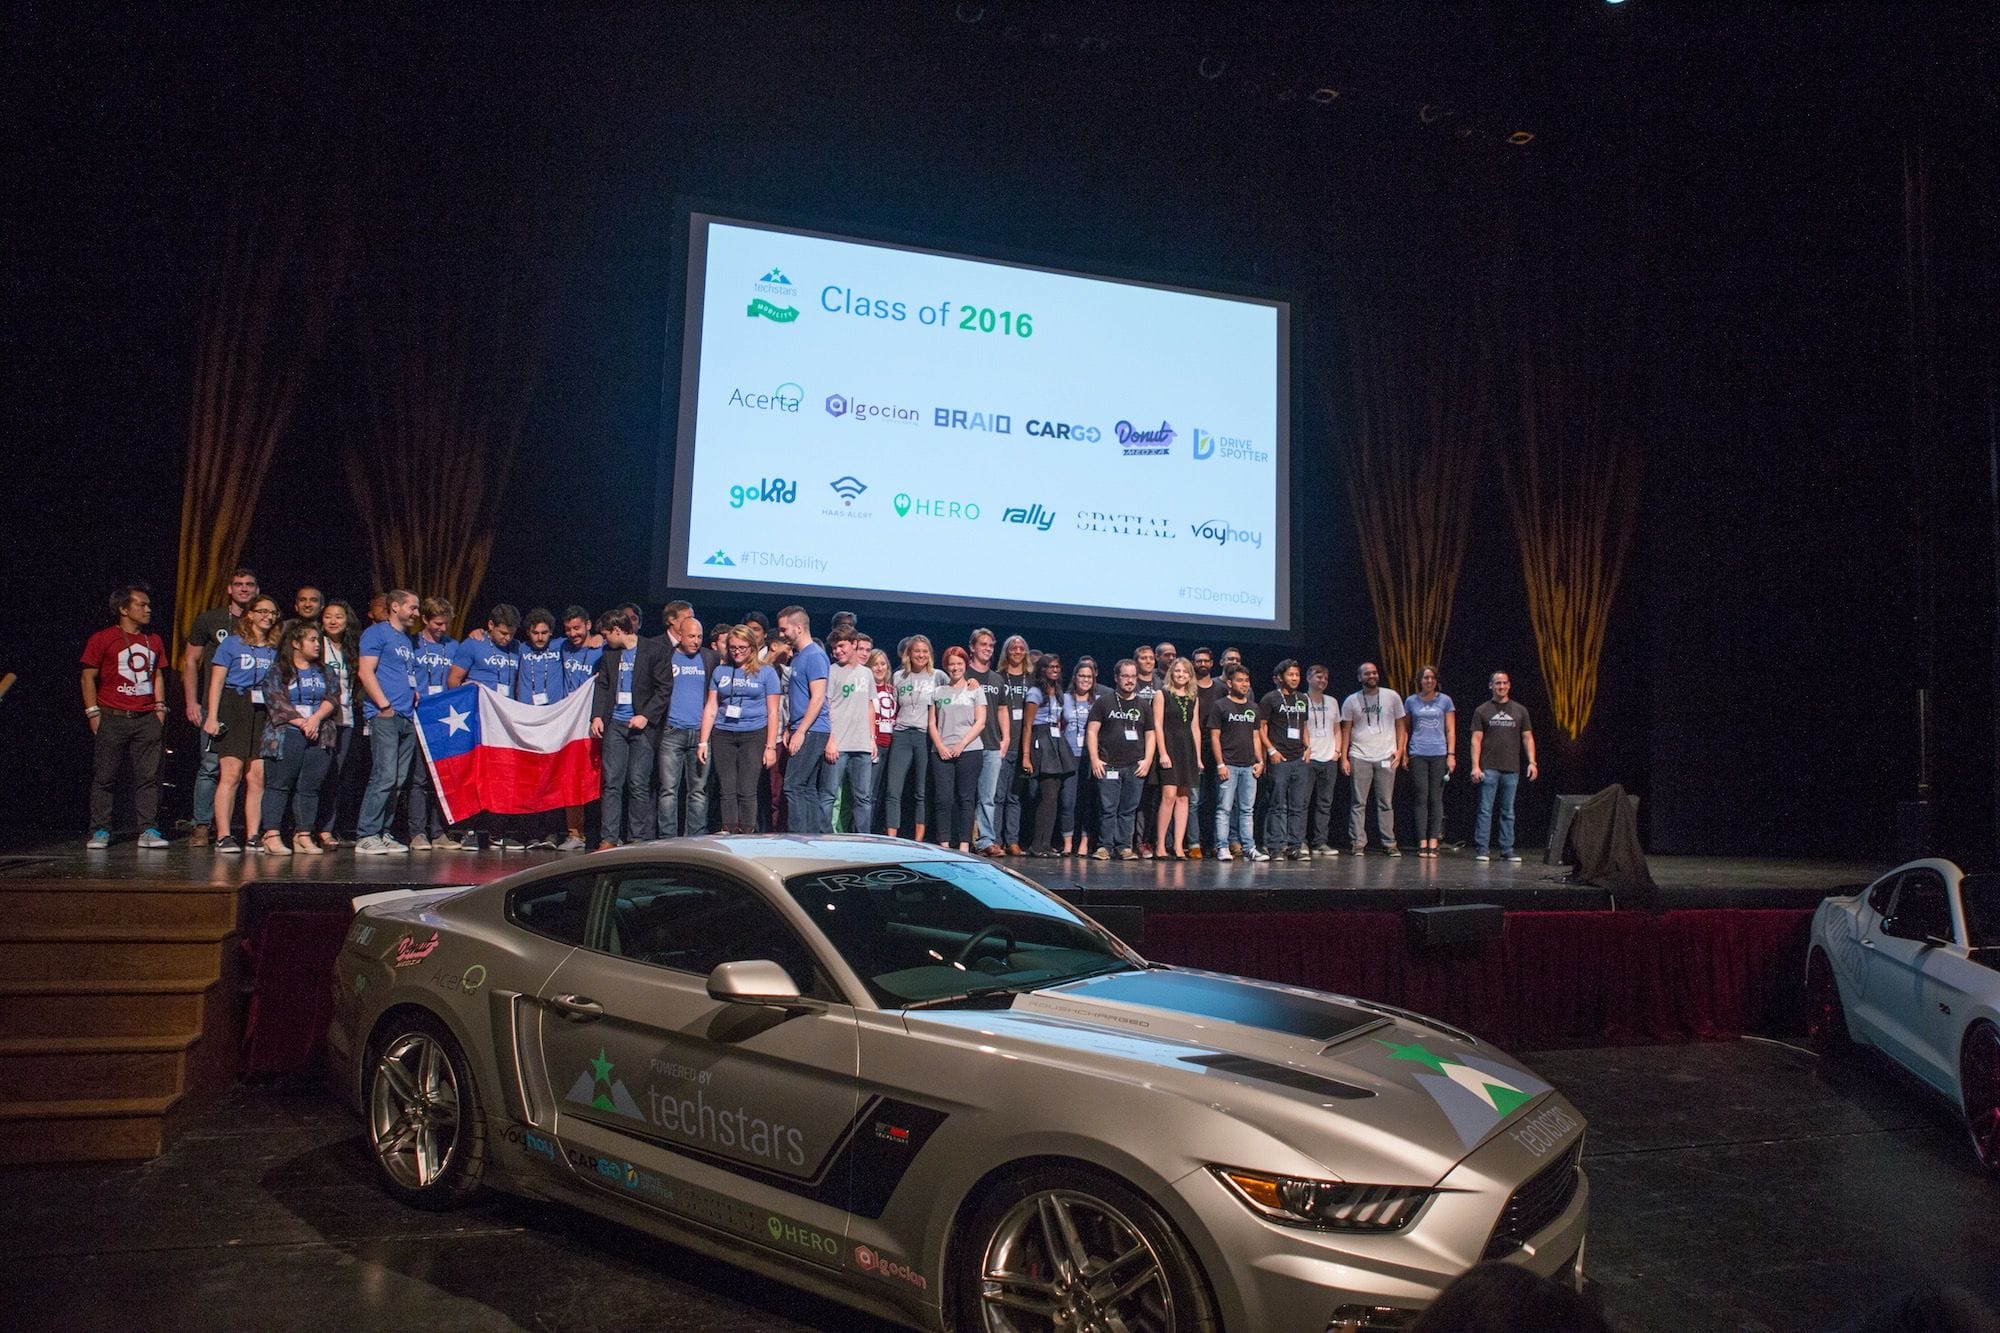 Introducing the Techstars Mobility Class of 2016